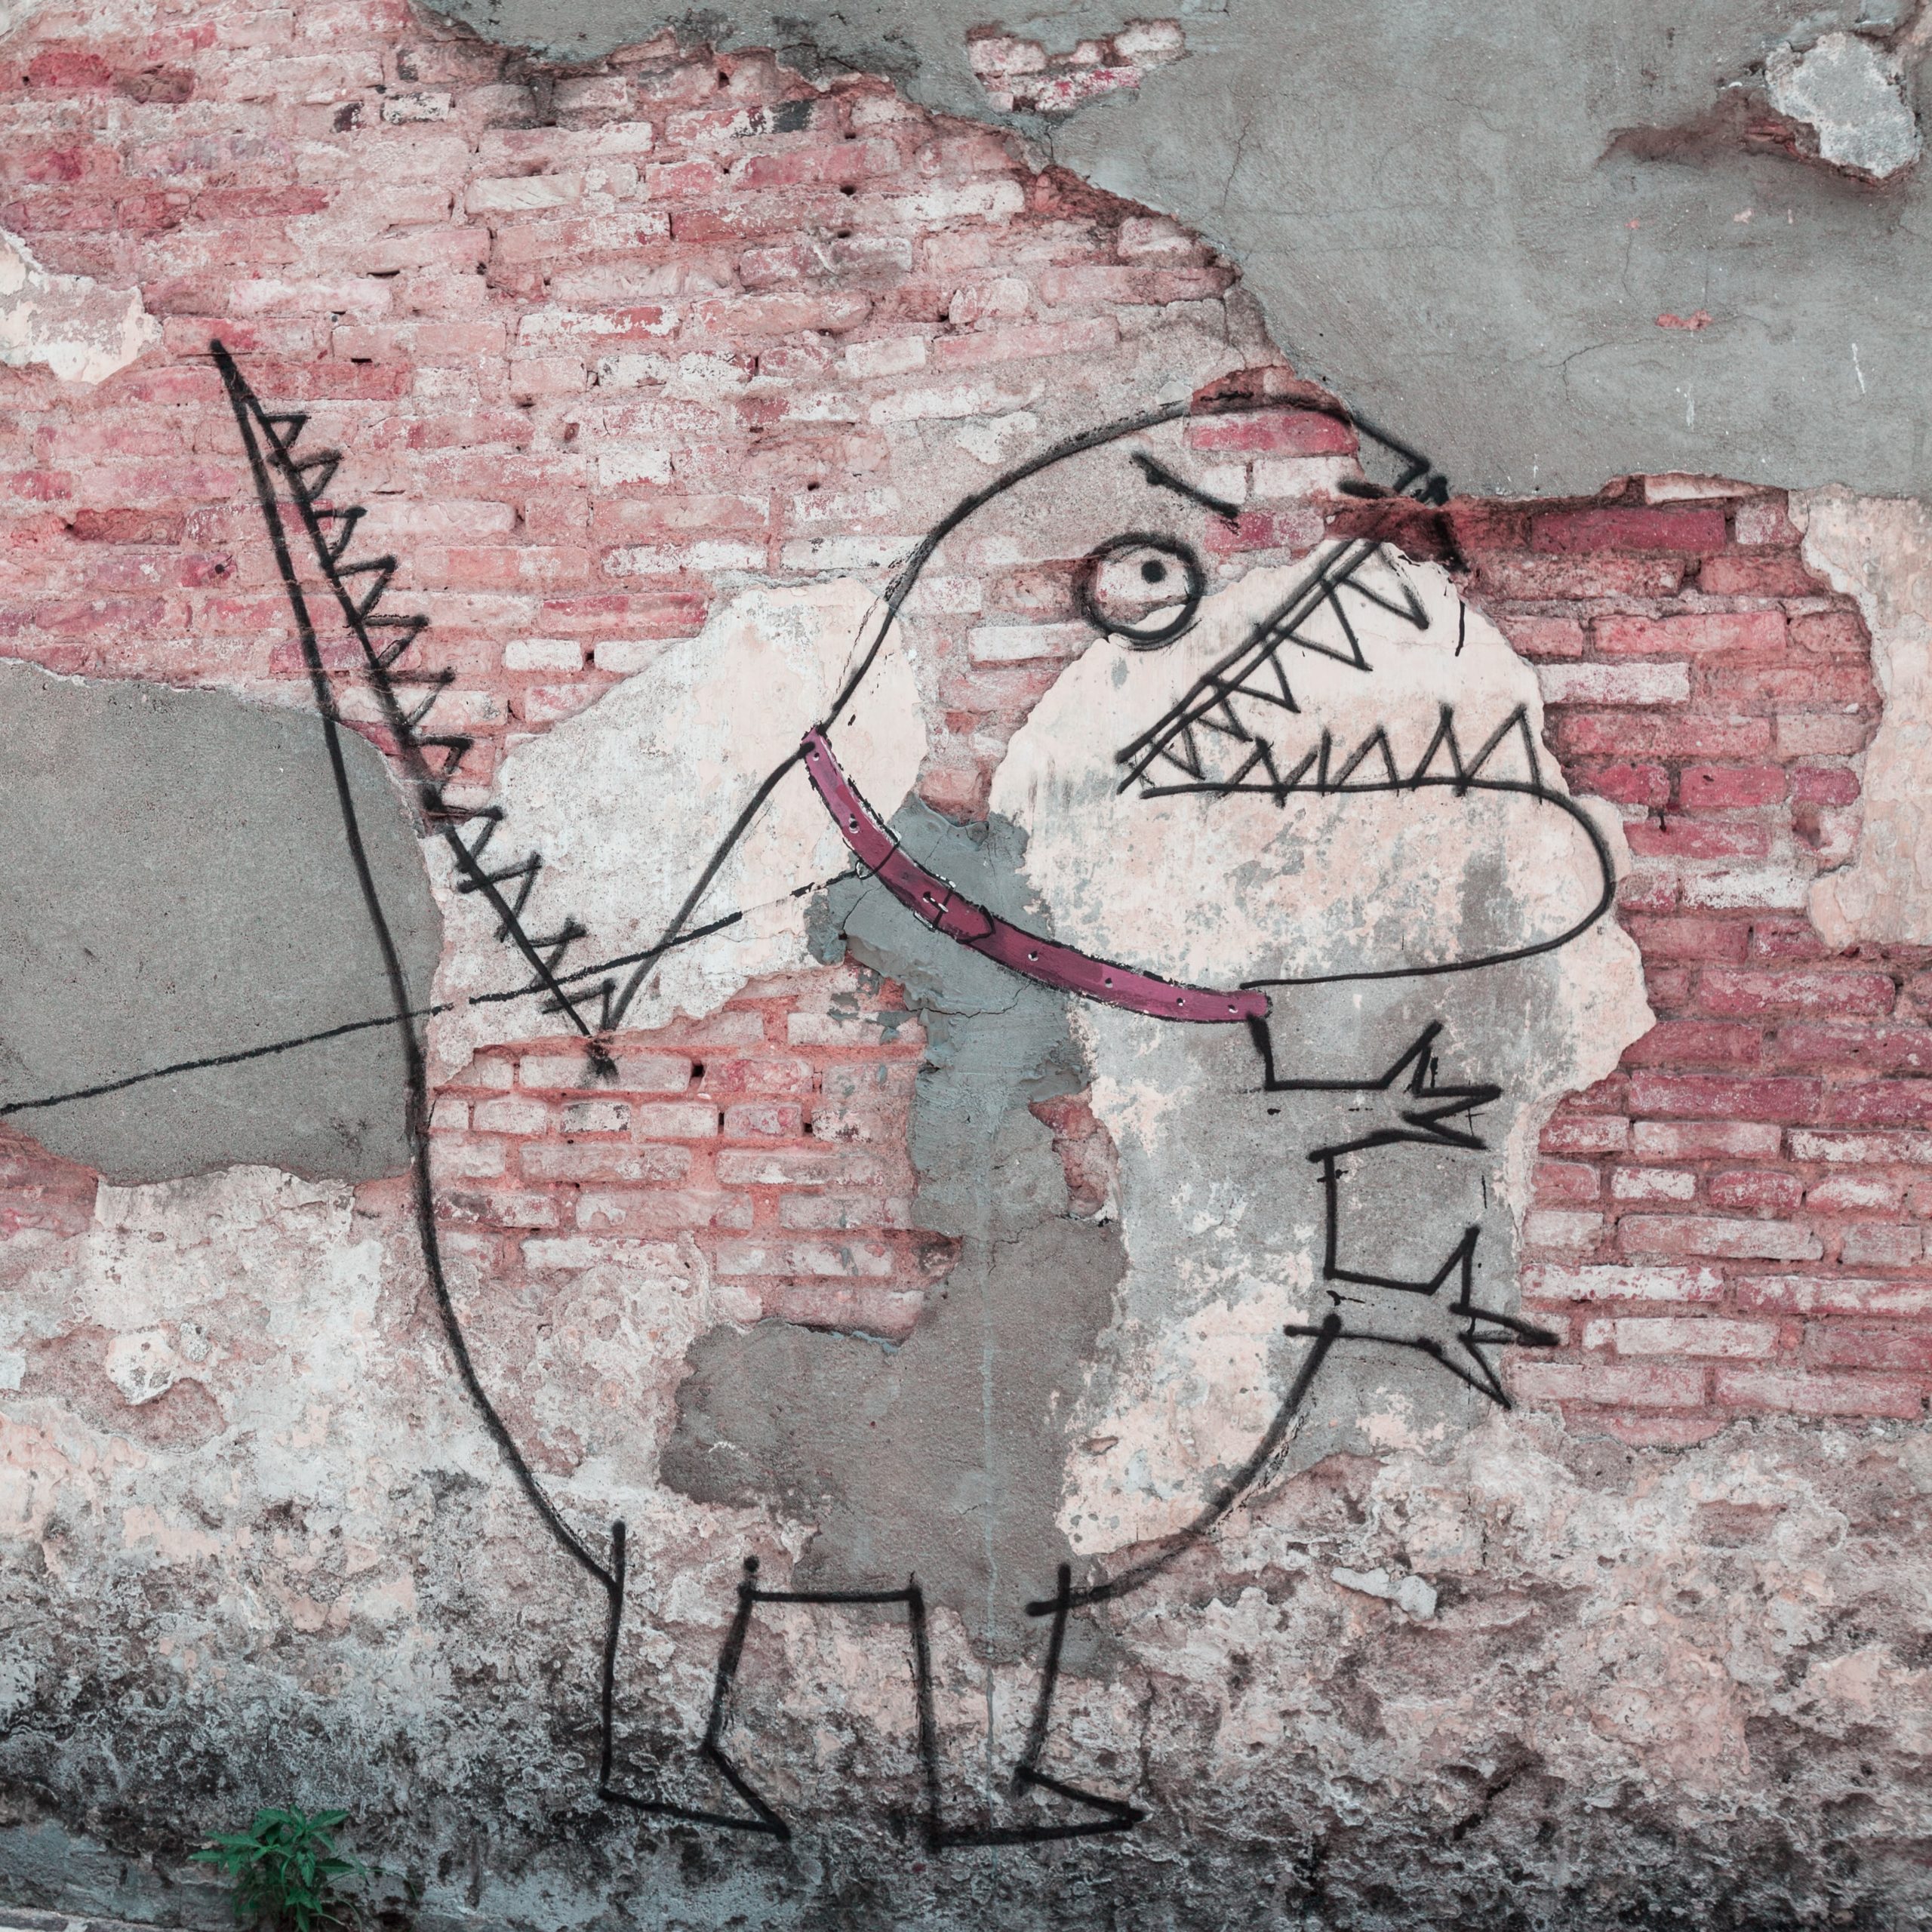 painted mural on red a brick wall of little boy holding a leash with a spray painted monster attached